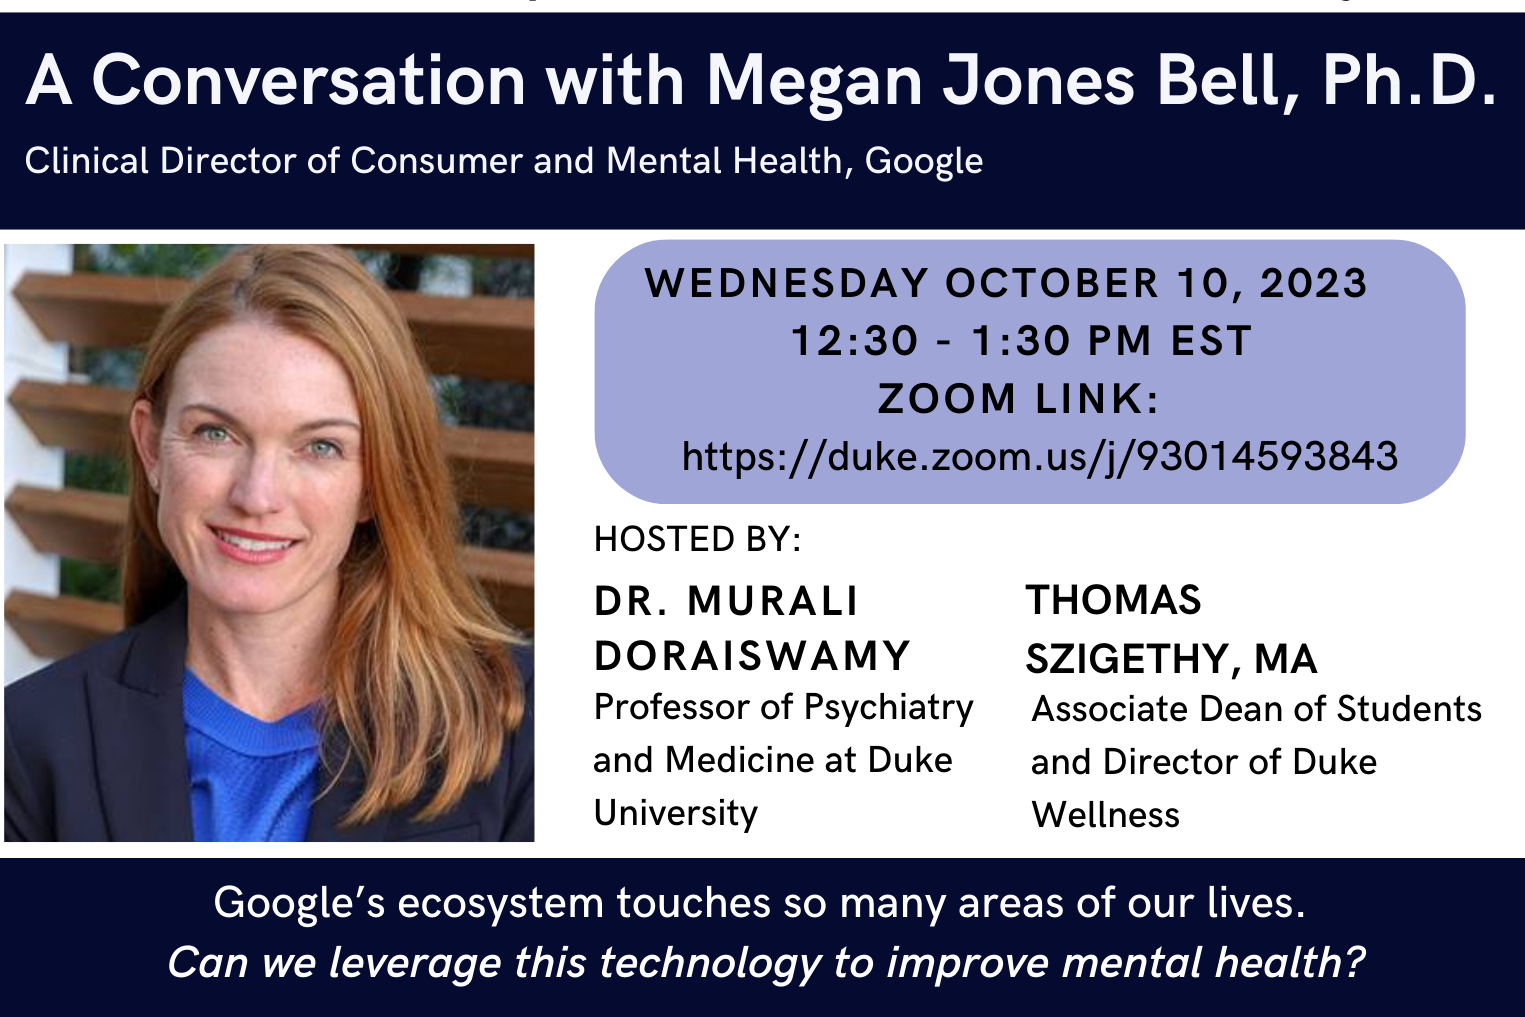 Can we leverage Google's technology to improve mental health? A Conversation with Megan Jones Bell